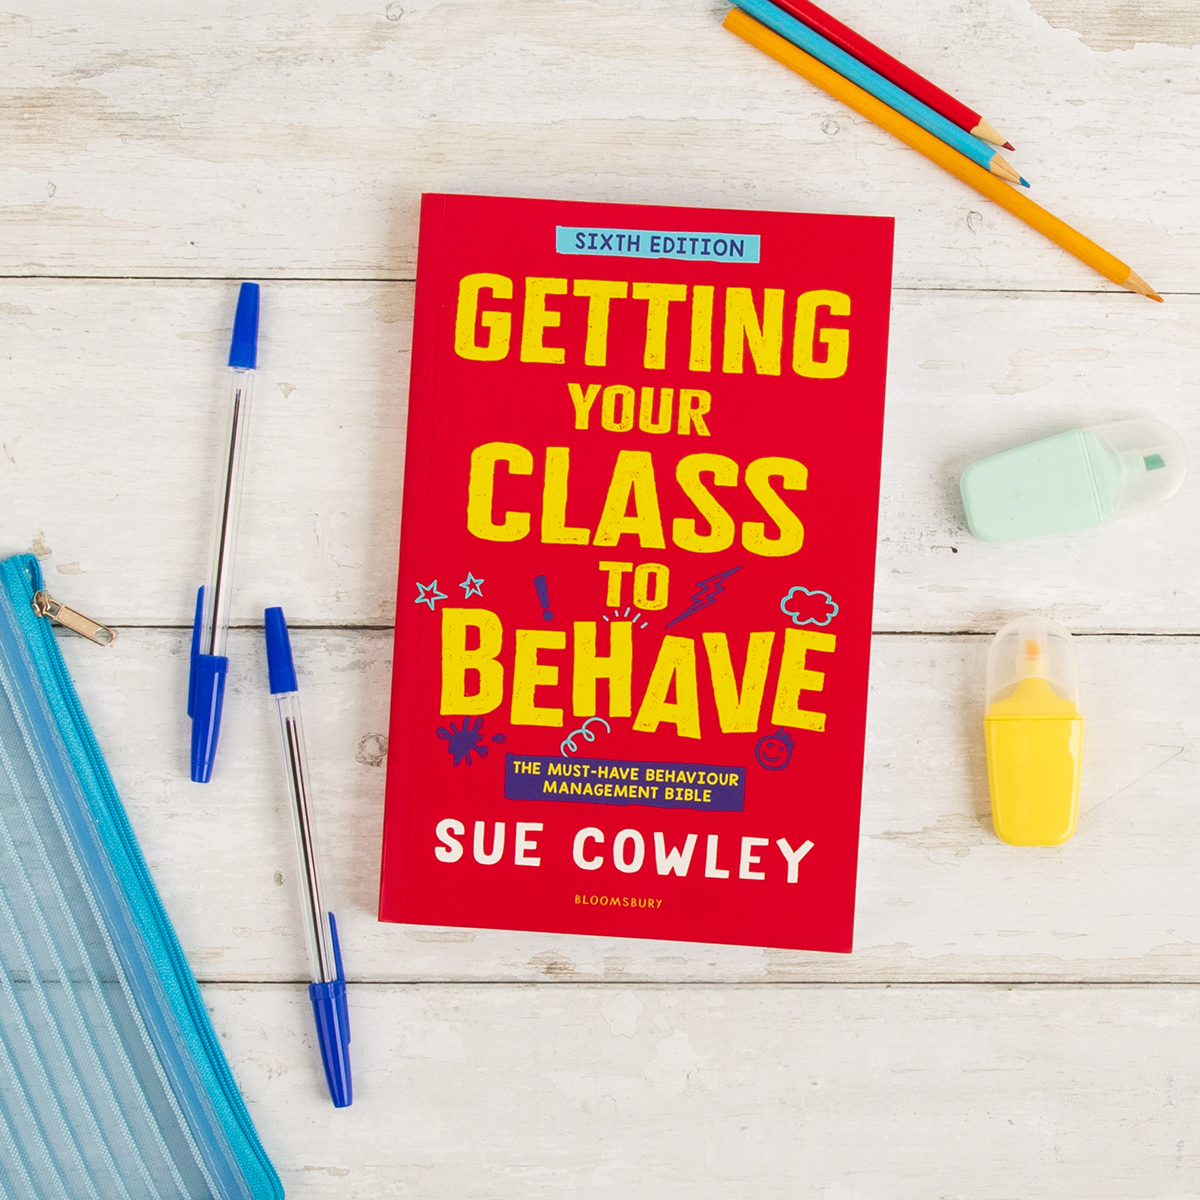 🚨 CALLING ALL TEACHERS AND EDUCATORS! 🚨 We have a couple of some review copies of the updated brilliant new edition of the bestselling behaviour bible Getting Your Class to Behave by @Sue_Cowley! Want to grab an early copy? Put in your request now: bit.ly/3QorTSw